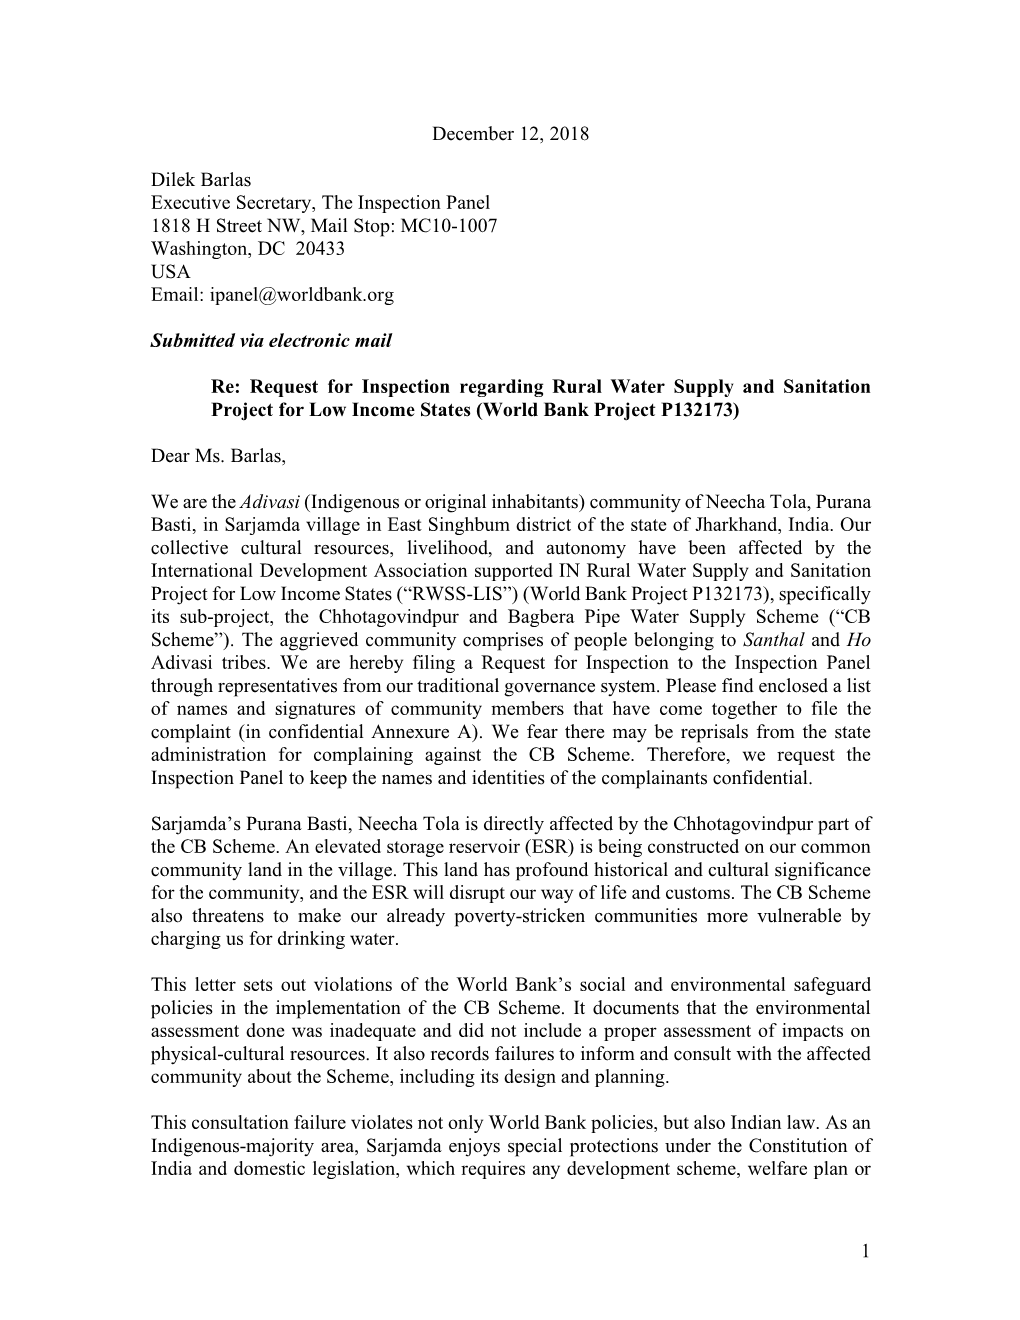 Request for Inspection Regarding Rural Water Supply and Sanitation Project for Low Income States (World Bank Project P132173)